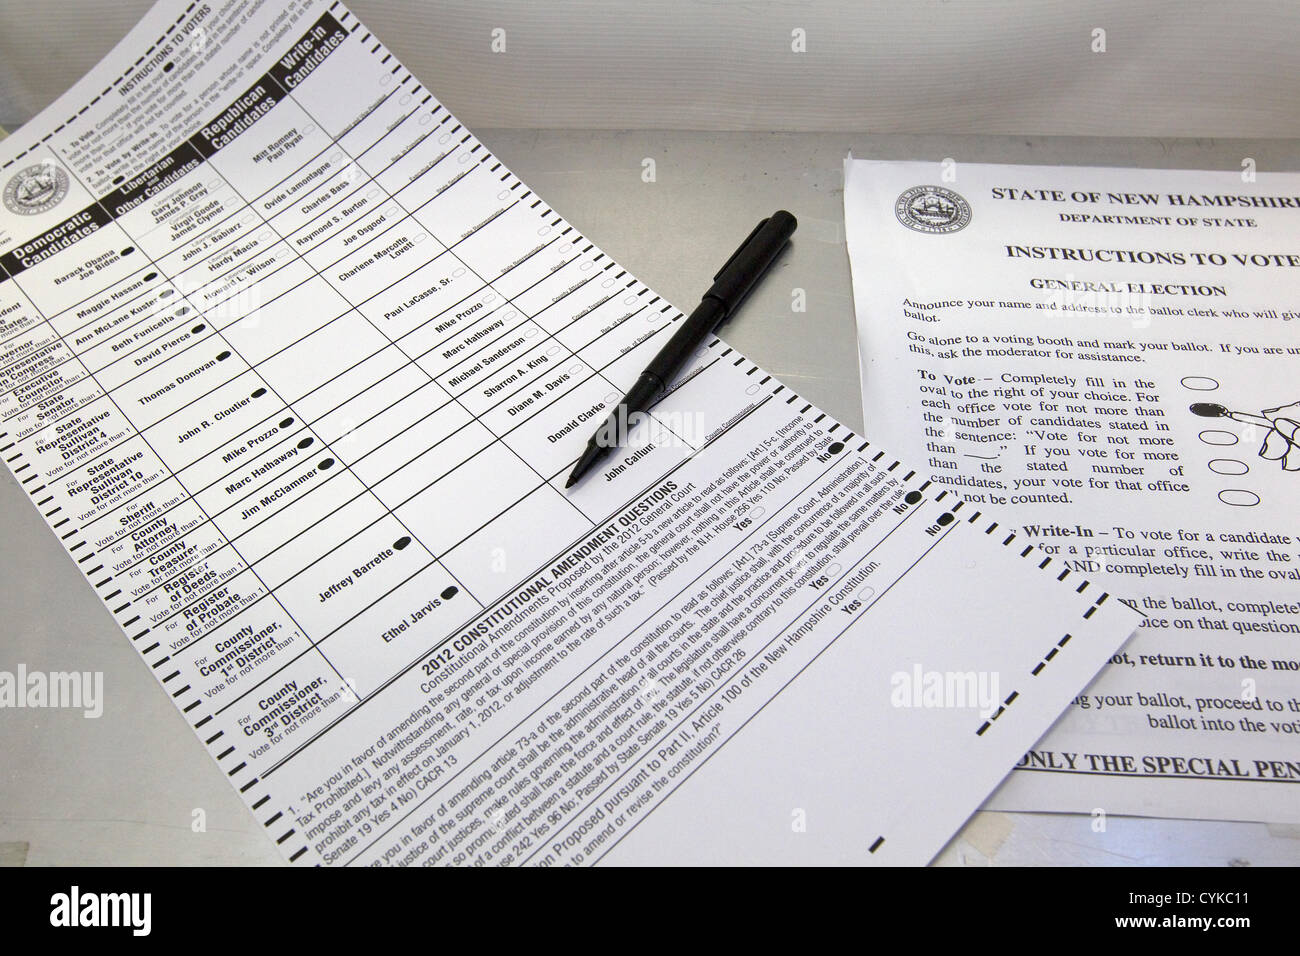 New Hampshire ballot and instructions for United States President, New Hampshire governor and other state and local offices, in Claremont, New Hampshire, November 6, 2012. Much debate has centered around ballot integrity across the country, in this and in past presidential elections. Stock Photo